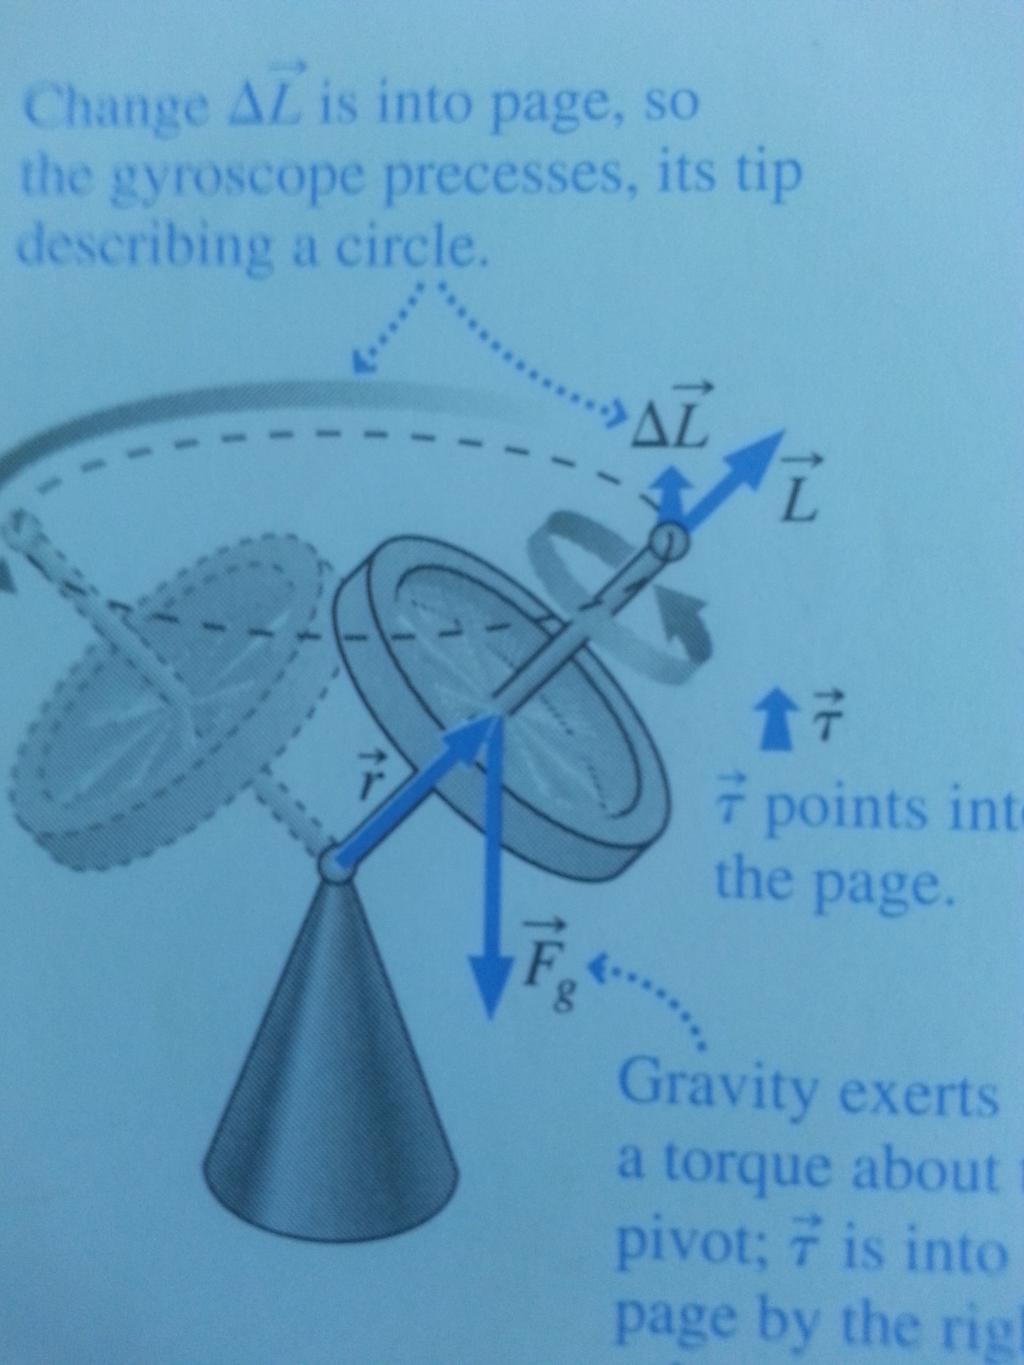 Precession Diagram from the text: Gravity exerts torque t is into the page by